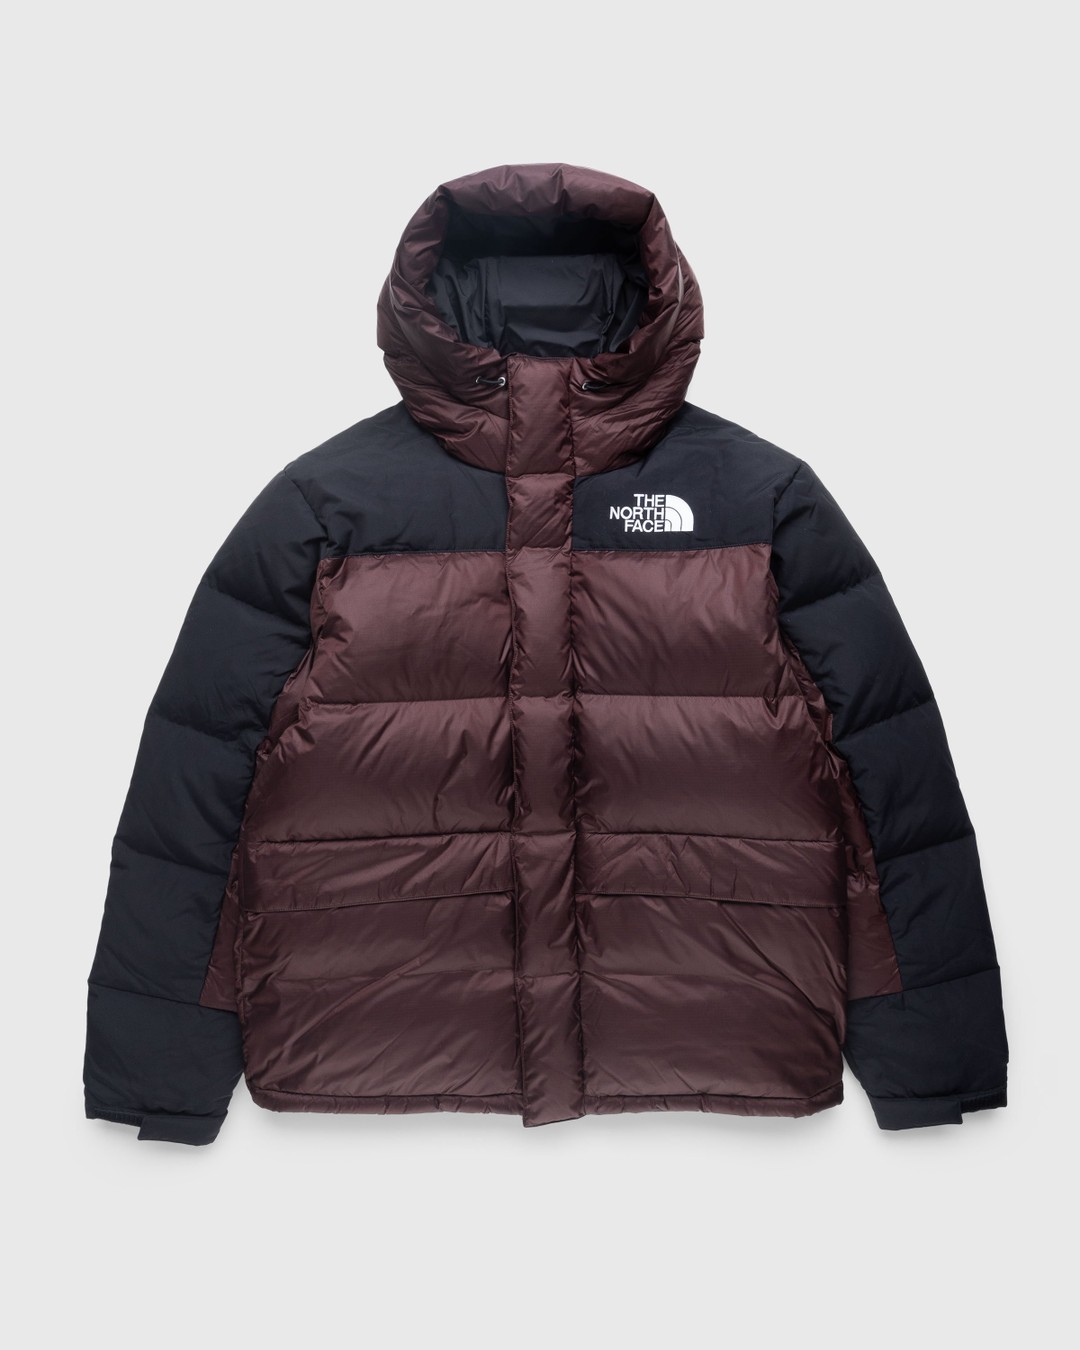 The North Face – Himalayan Down Parka Coal Brown - Outerwear - Brown - Image 1